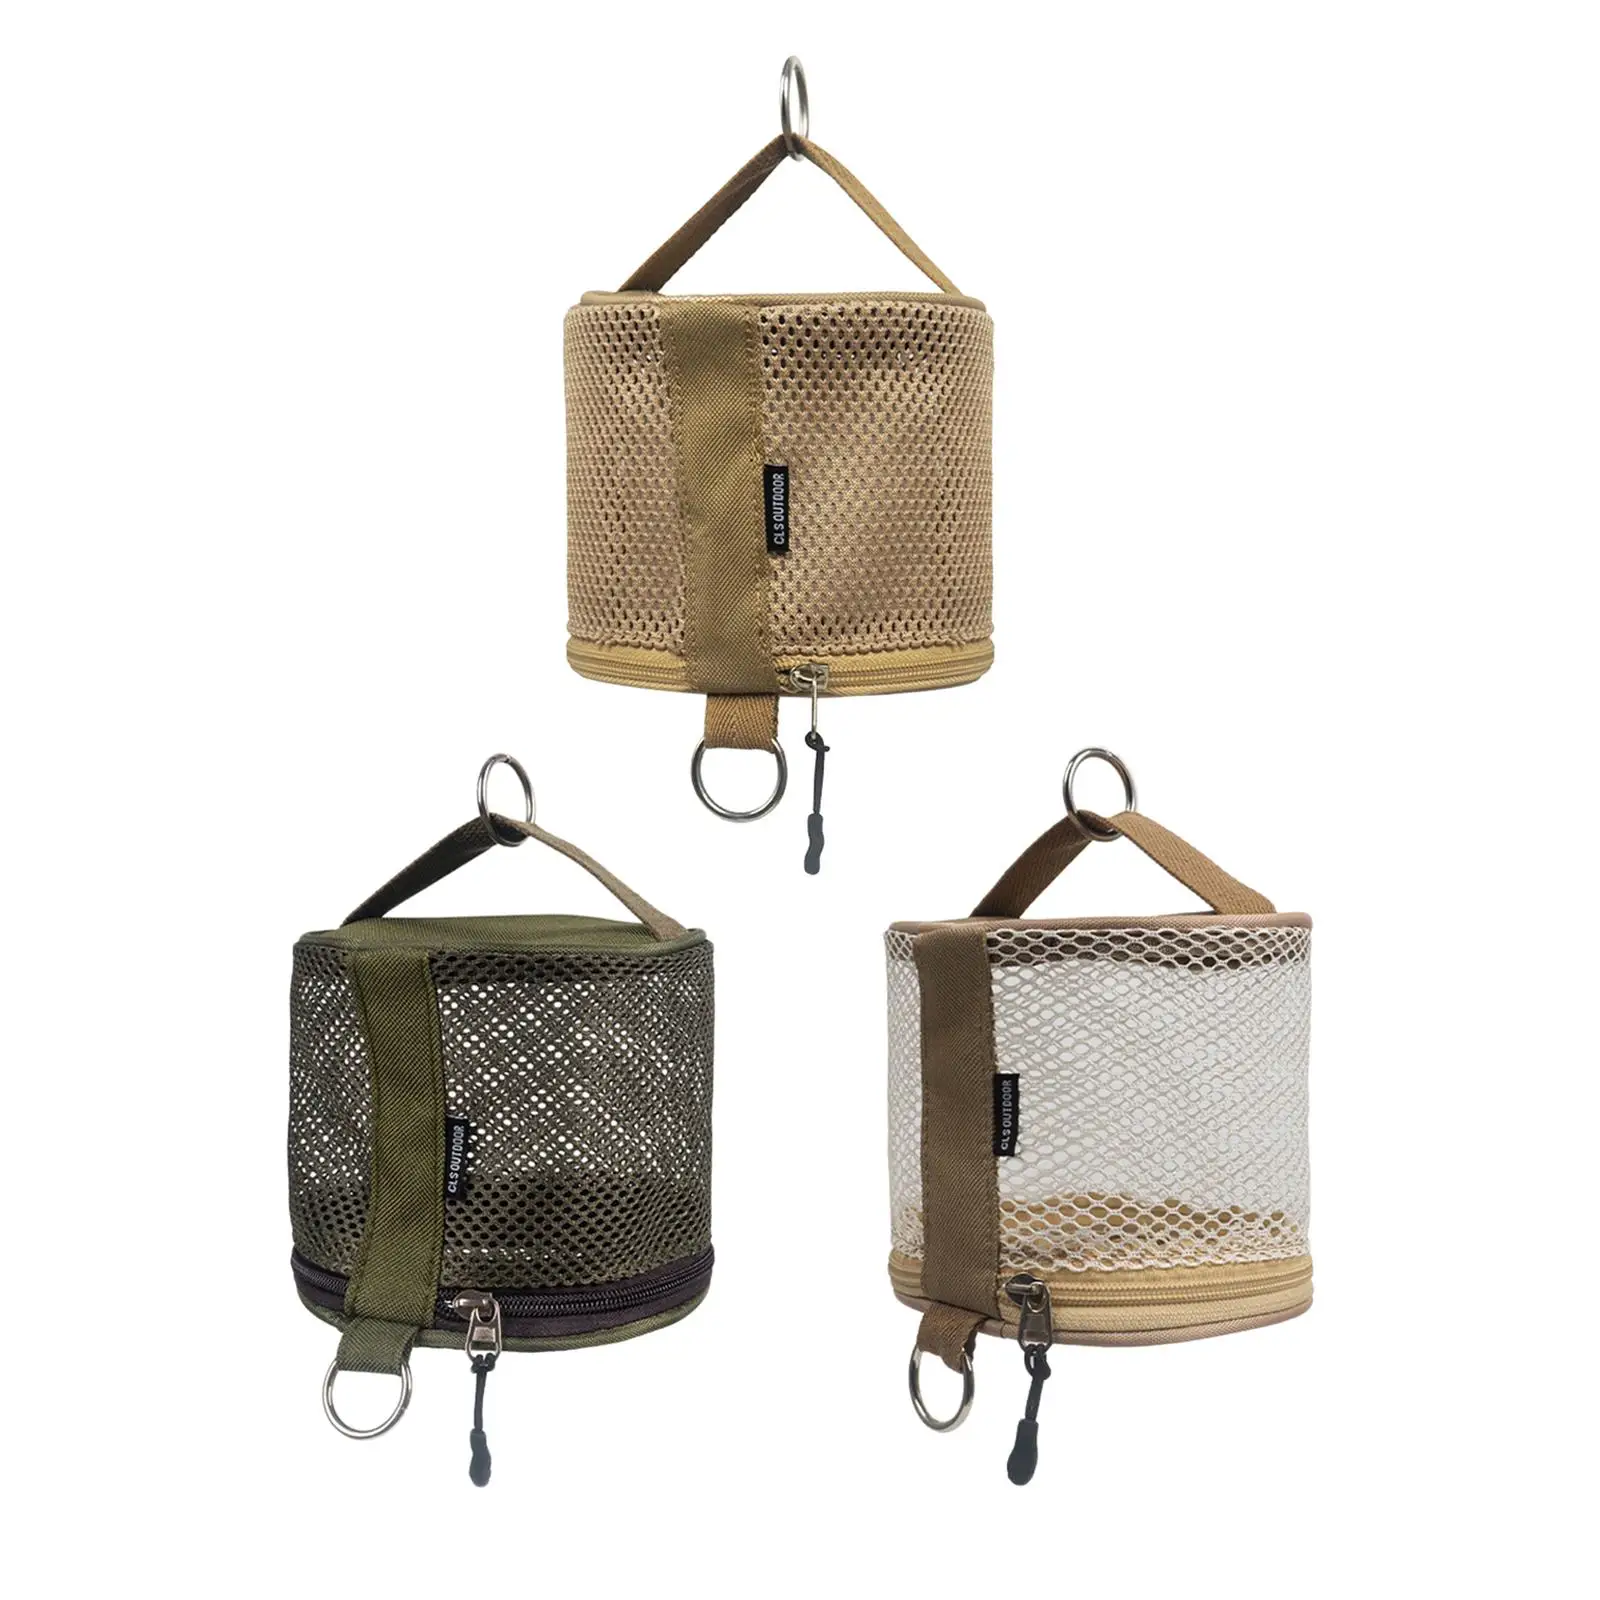 Outdoor Toilet Paper Holder, Hanging Paper Roll Holder with Metal Rings, Travel